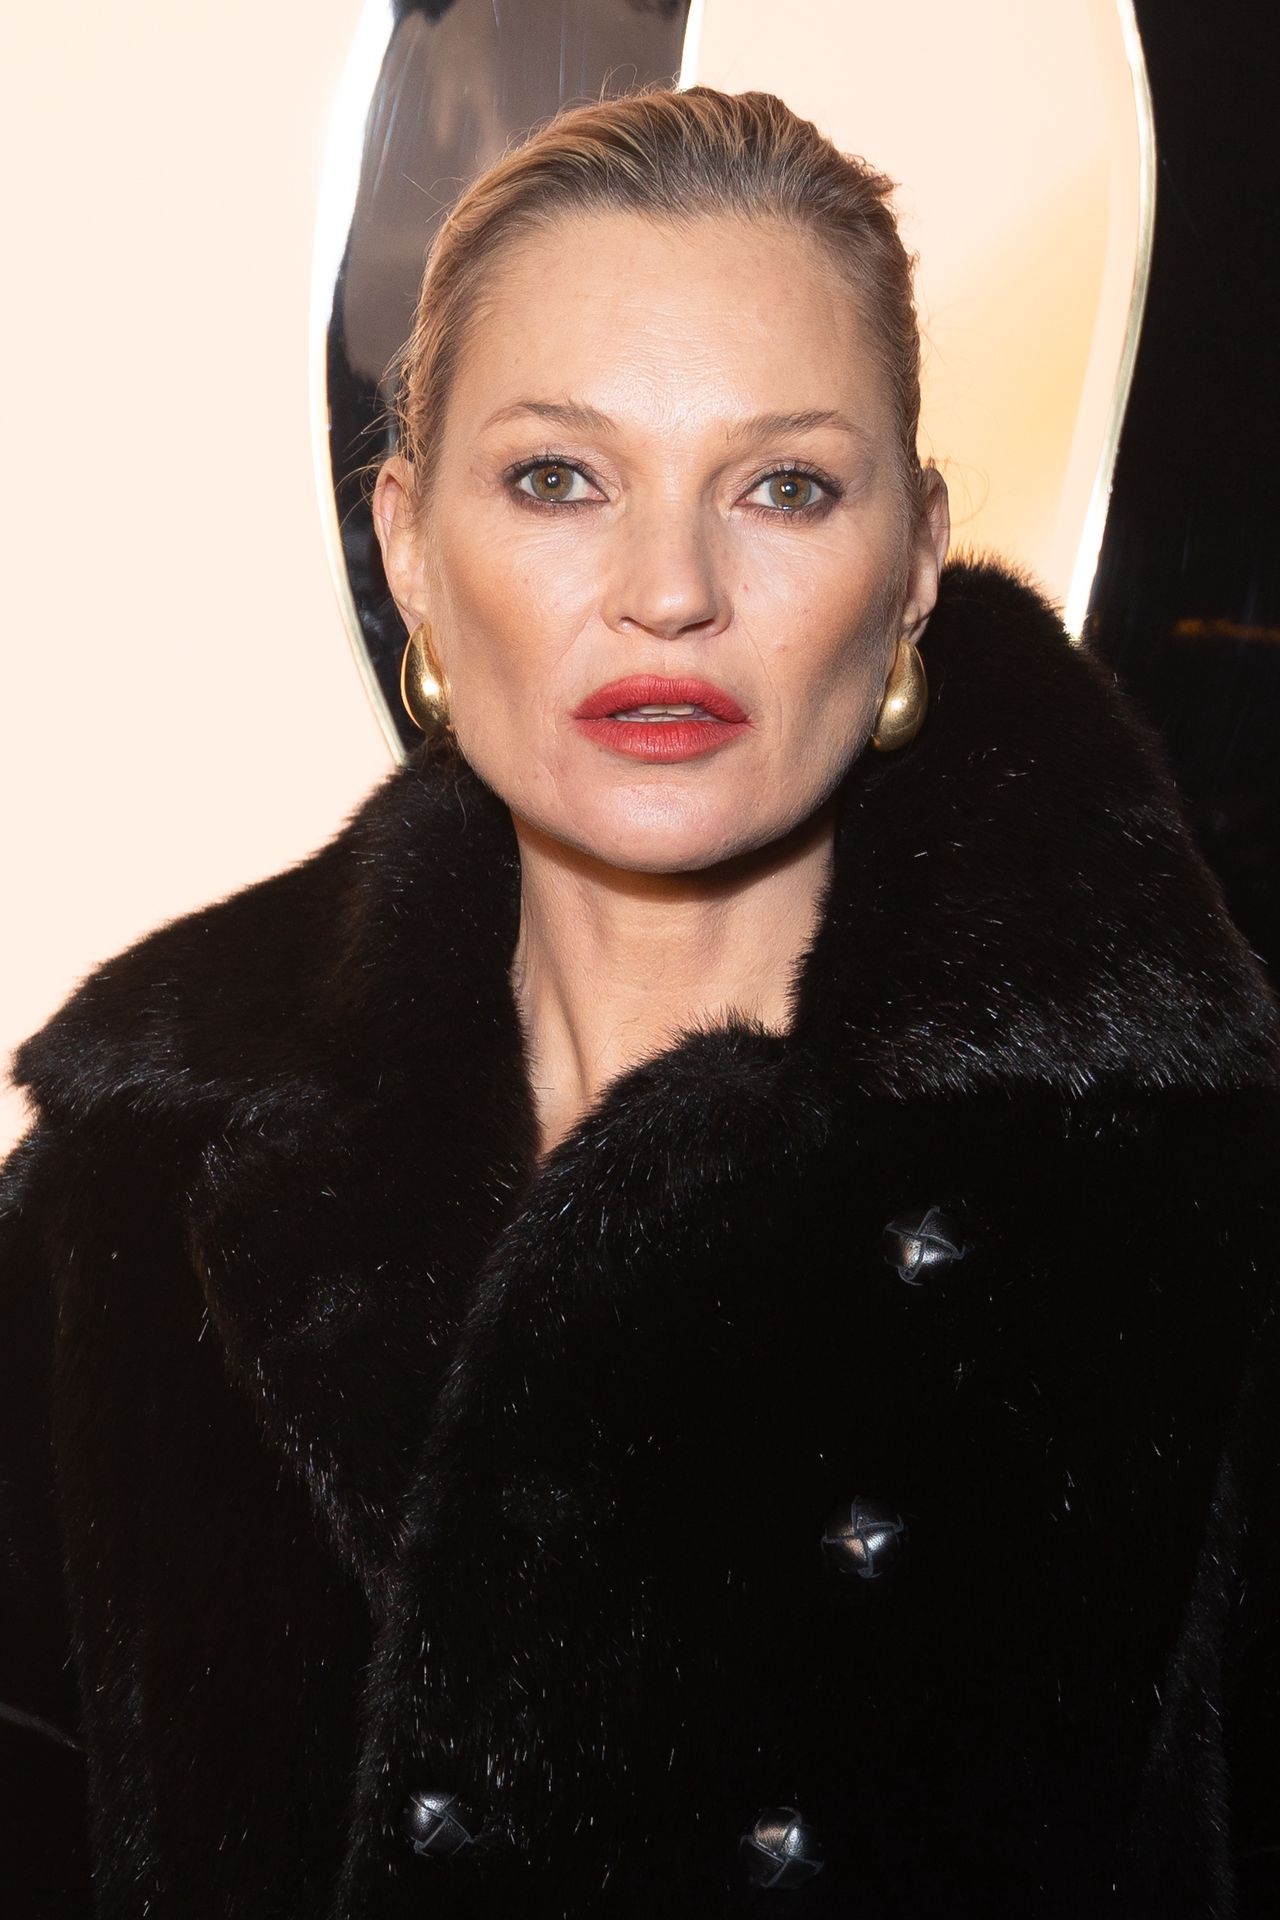 Does Kate Moss have a new boyfriend?